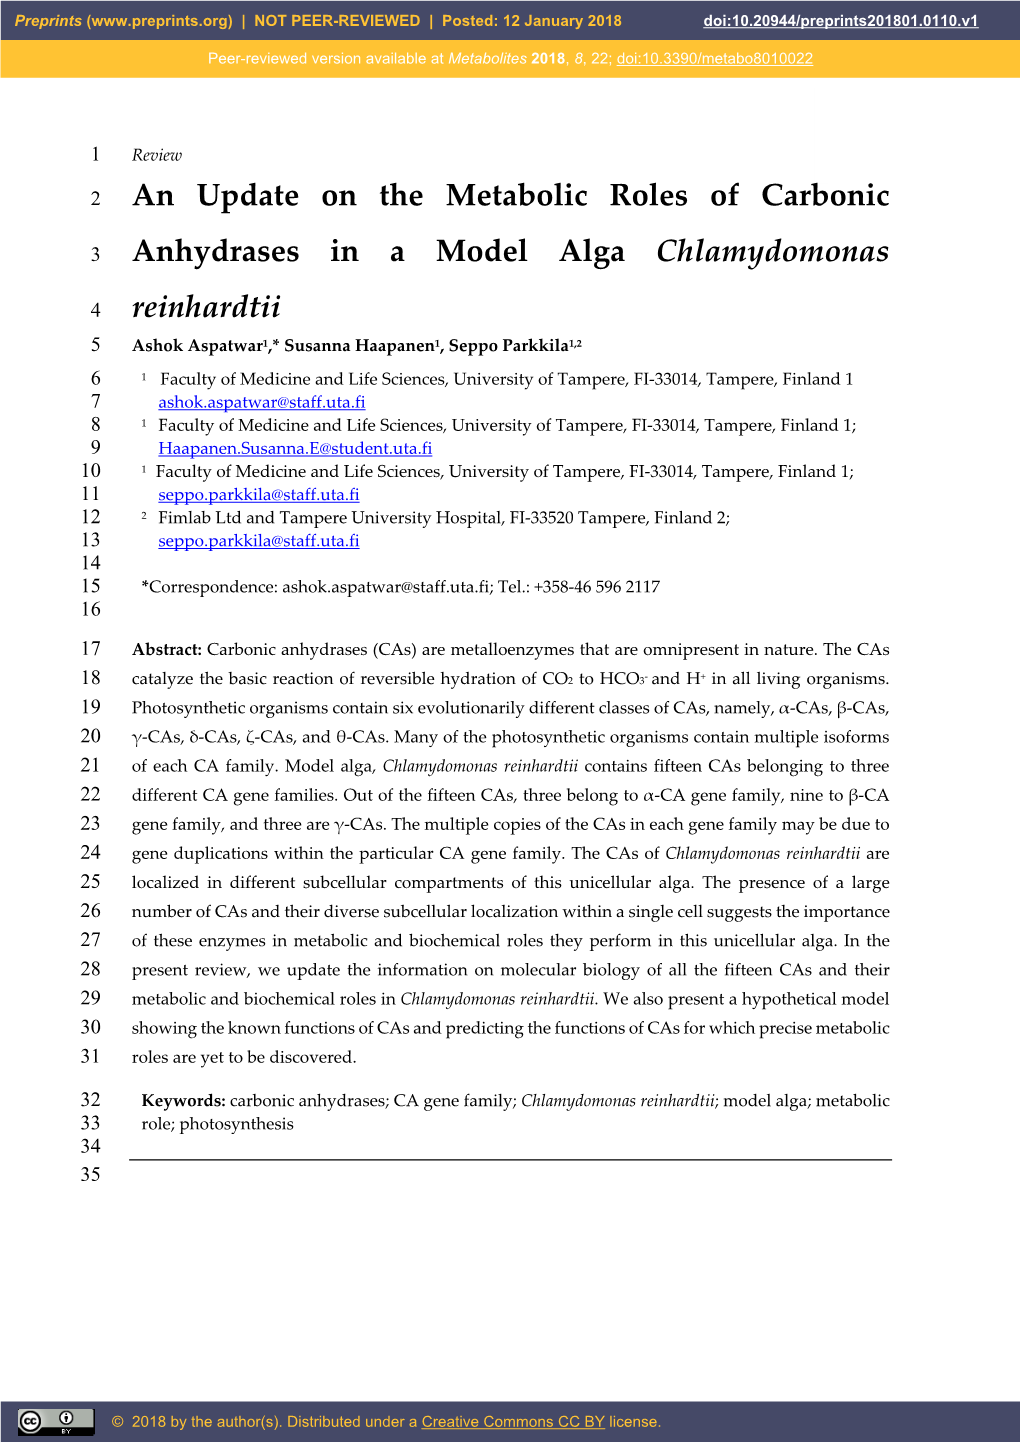 An Update on the Metabolic Roles of Carbonic Anhydrases in a Model